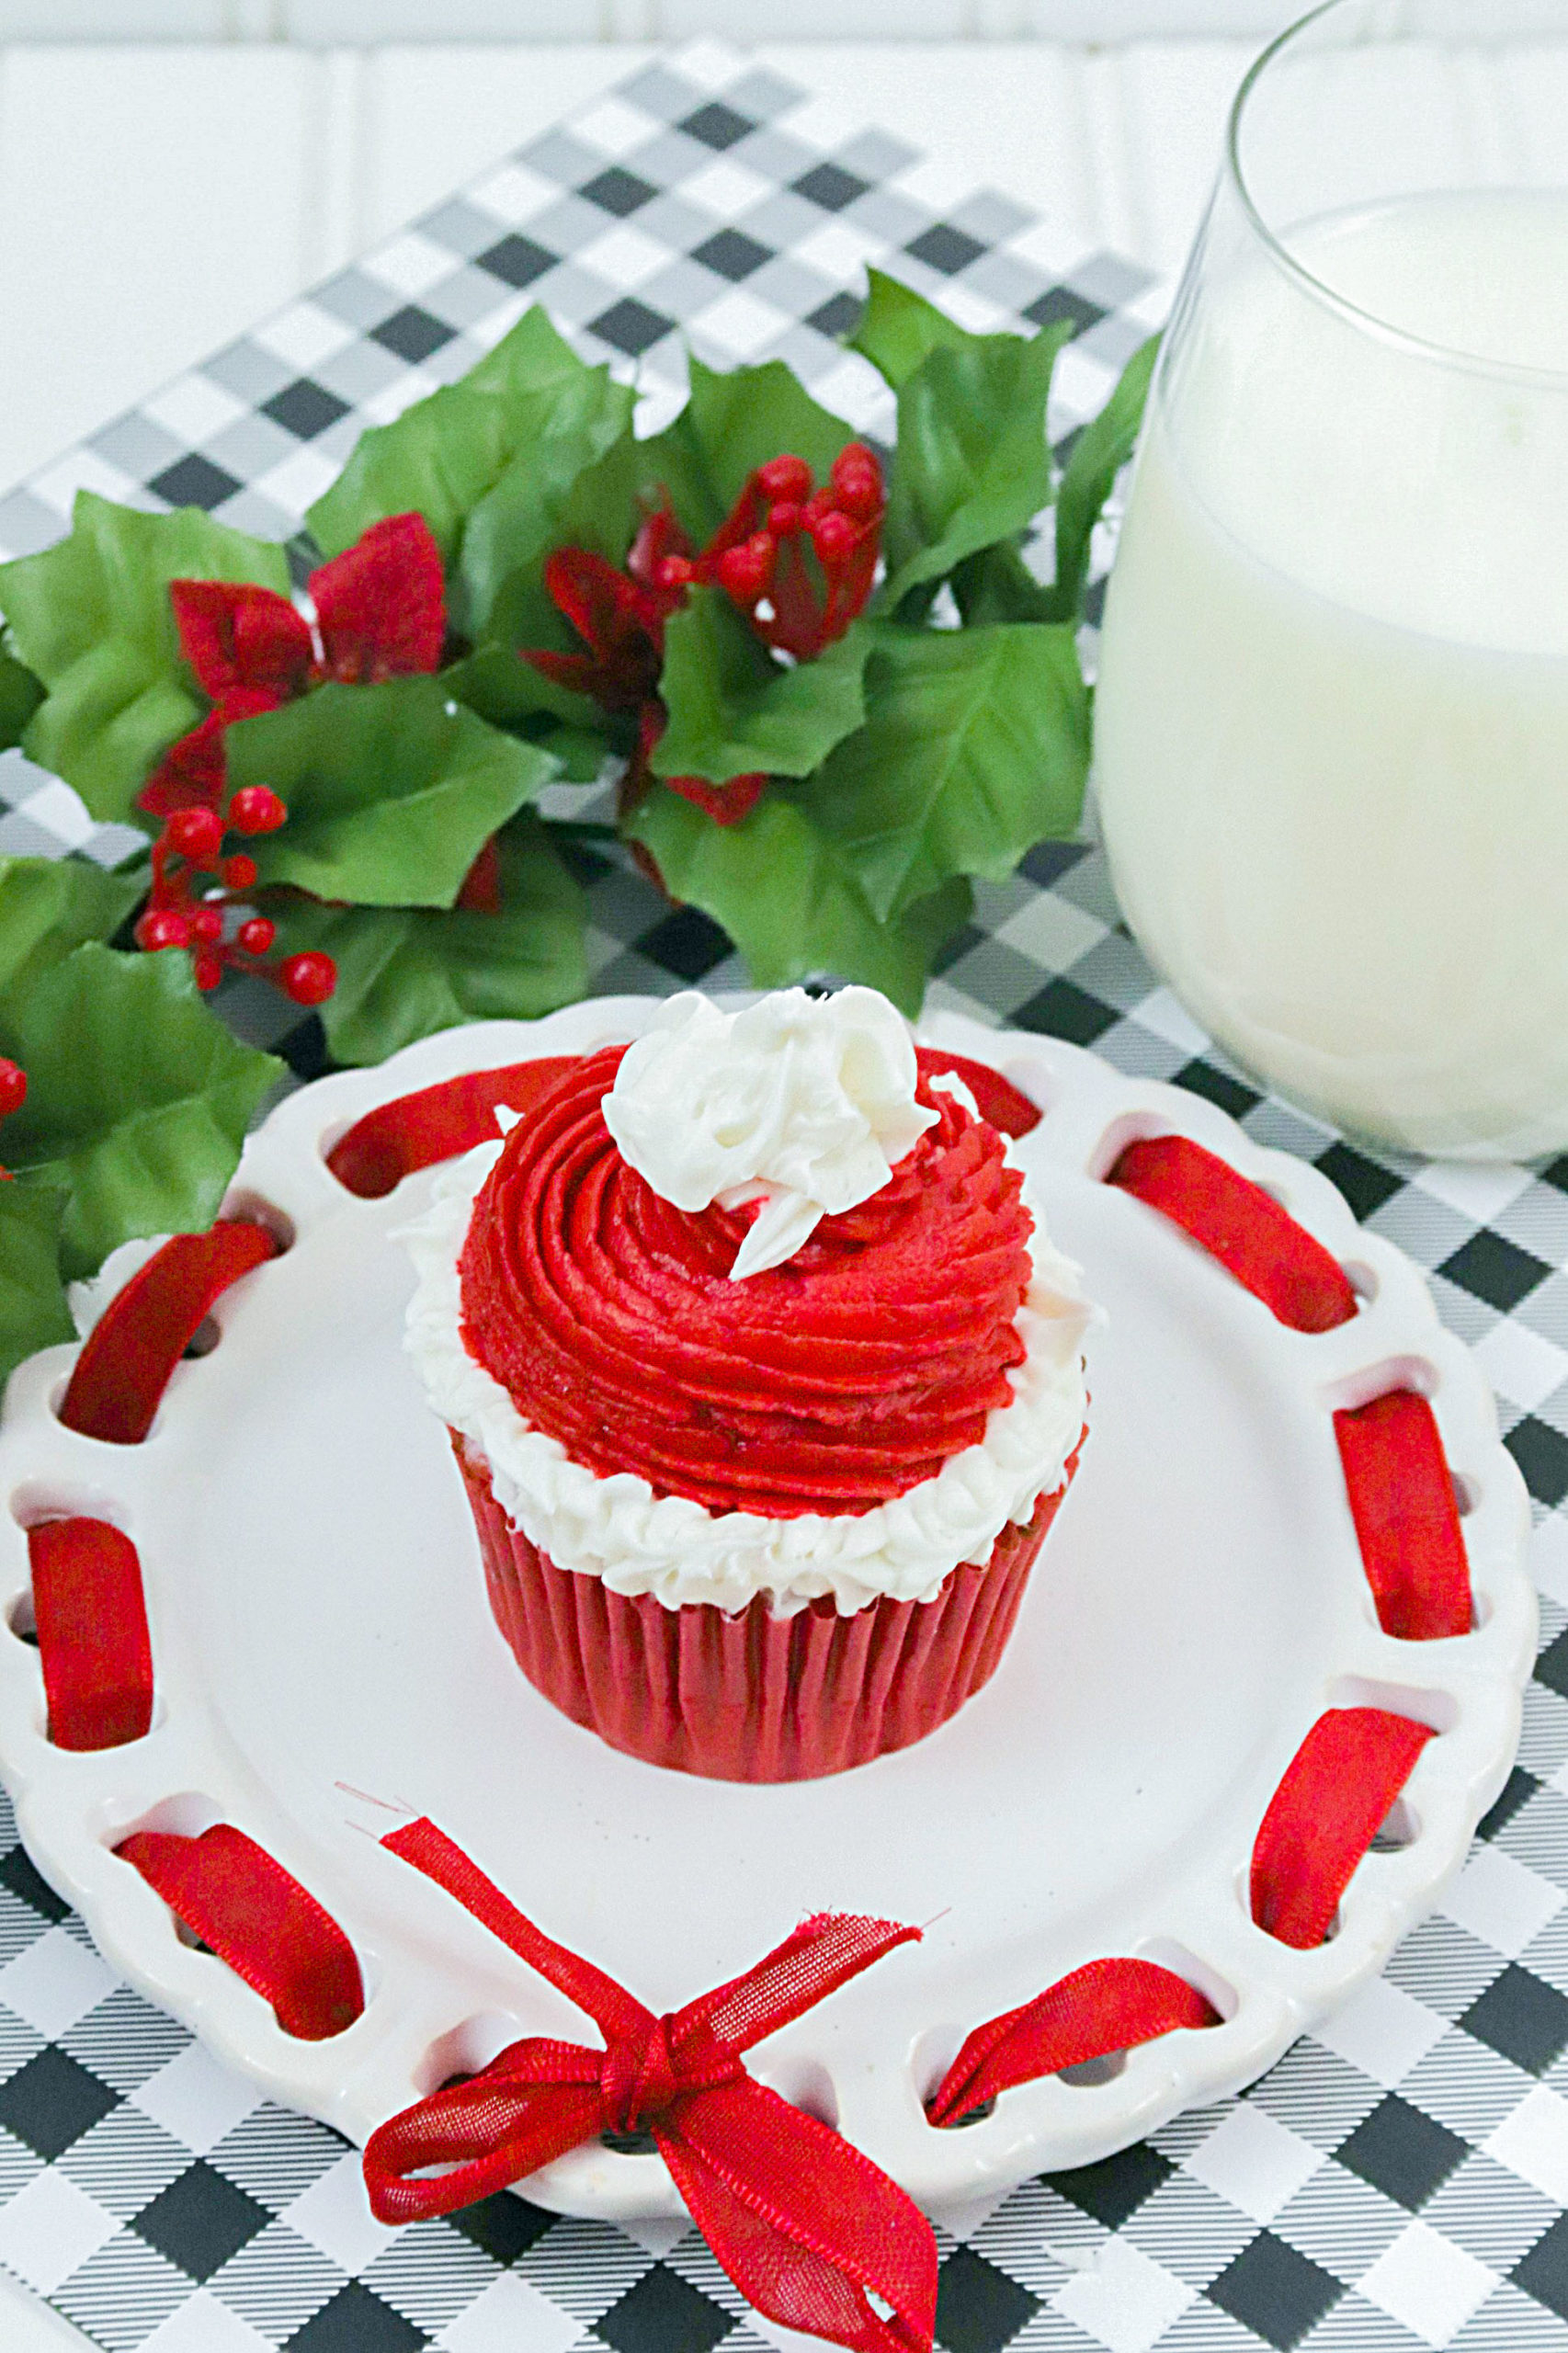 One Christmas Cupcake on a white plate with a big glass of milk on the right, and a sprig of holly on the top left.